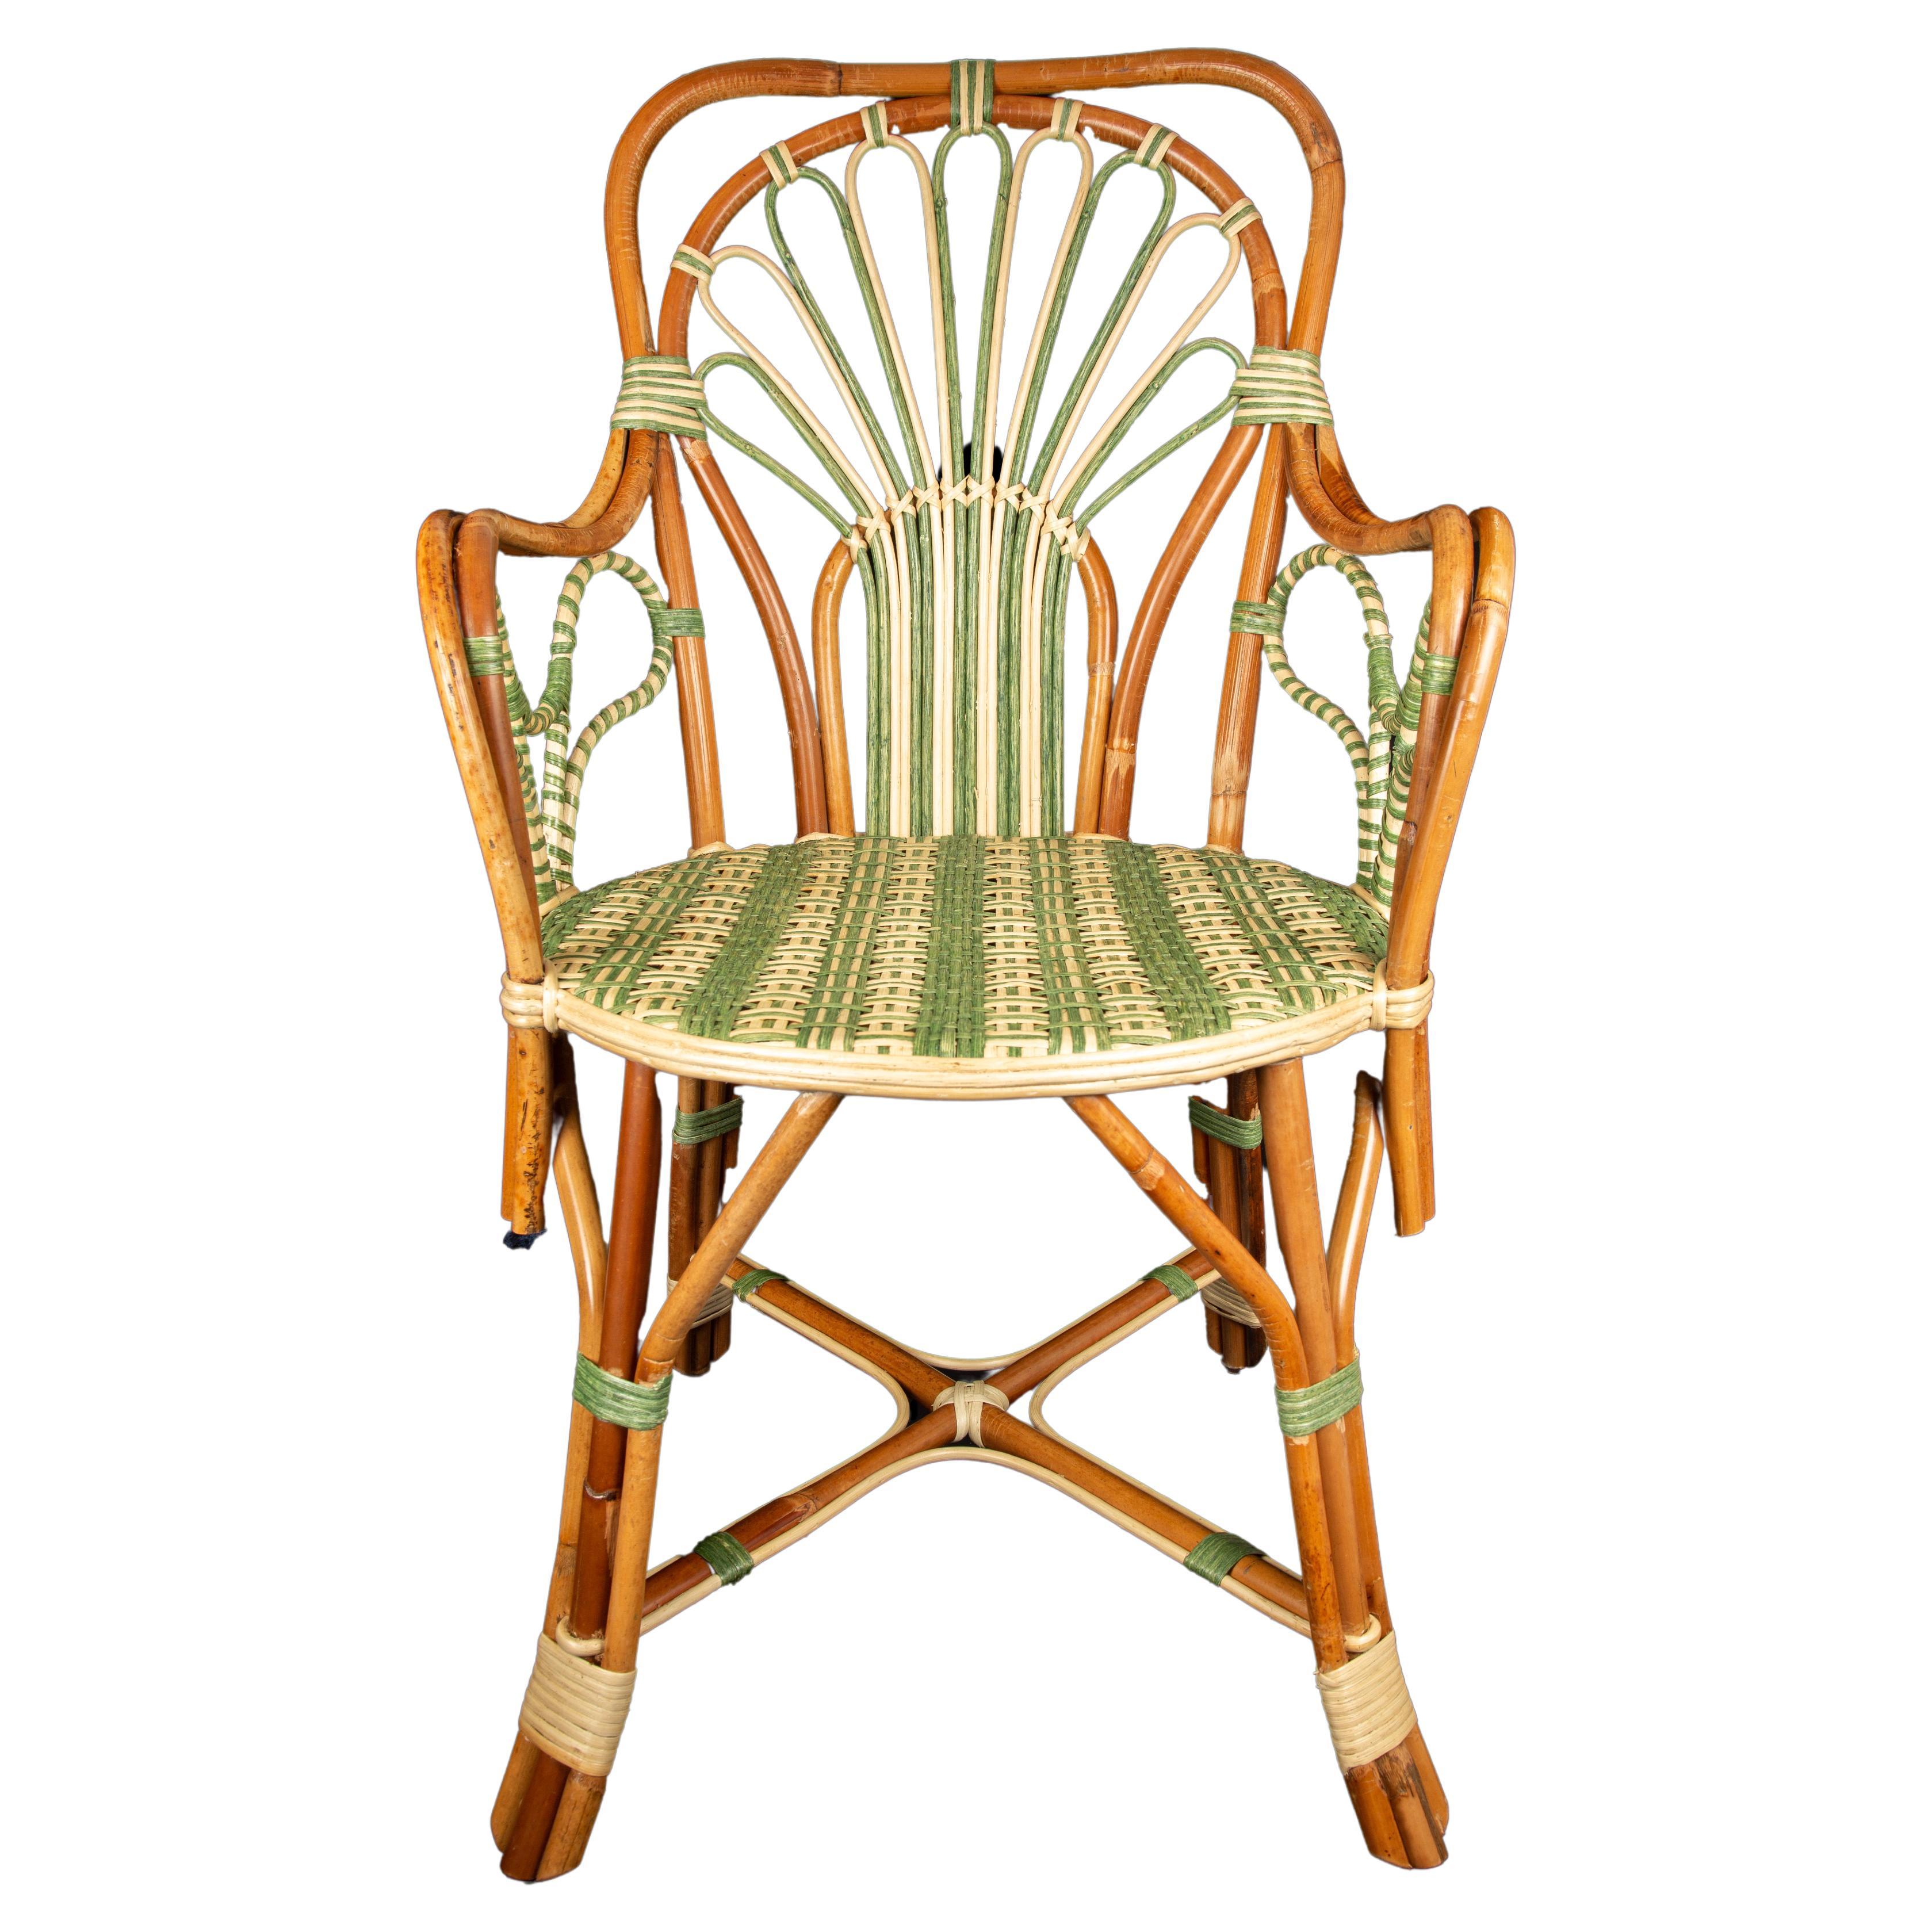 Peacock Rattan Arm Chair by Creel and Gow